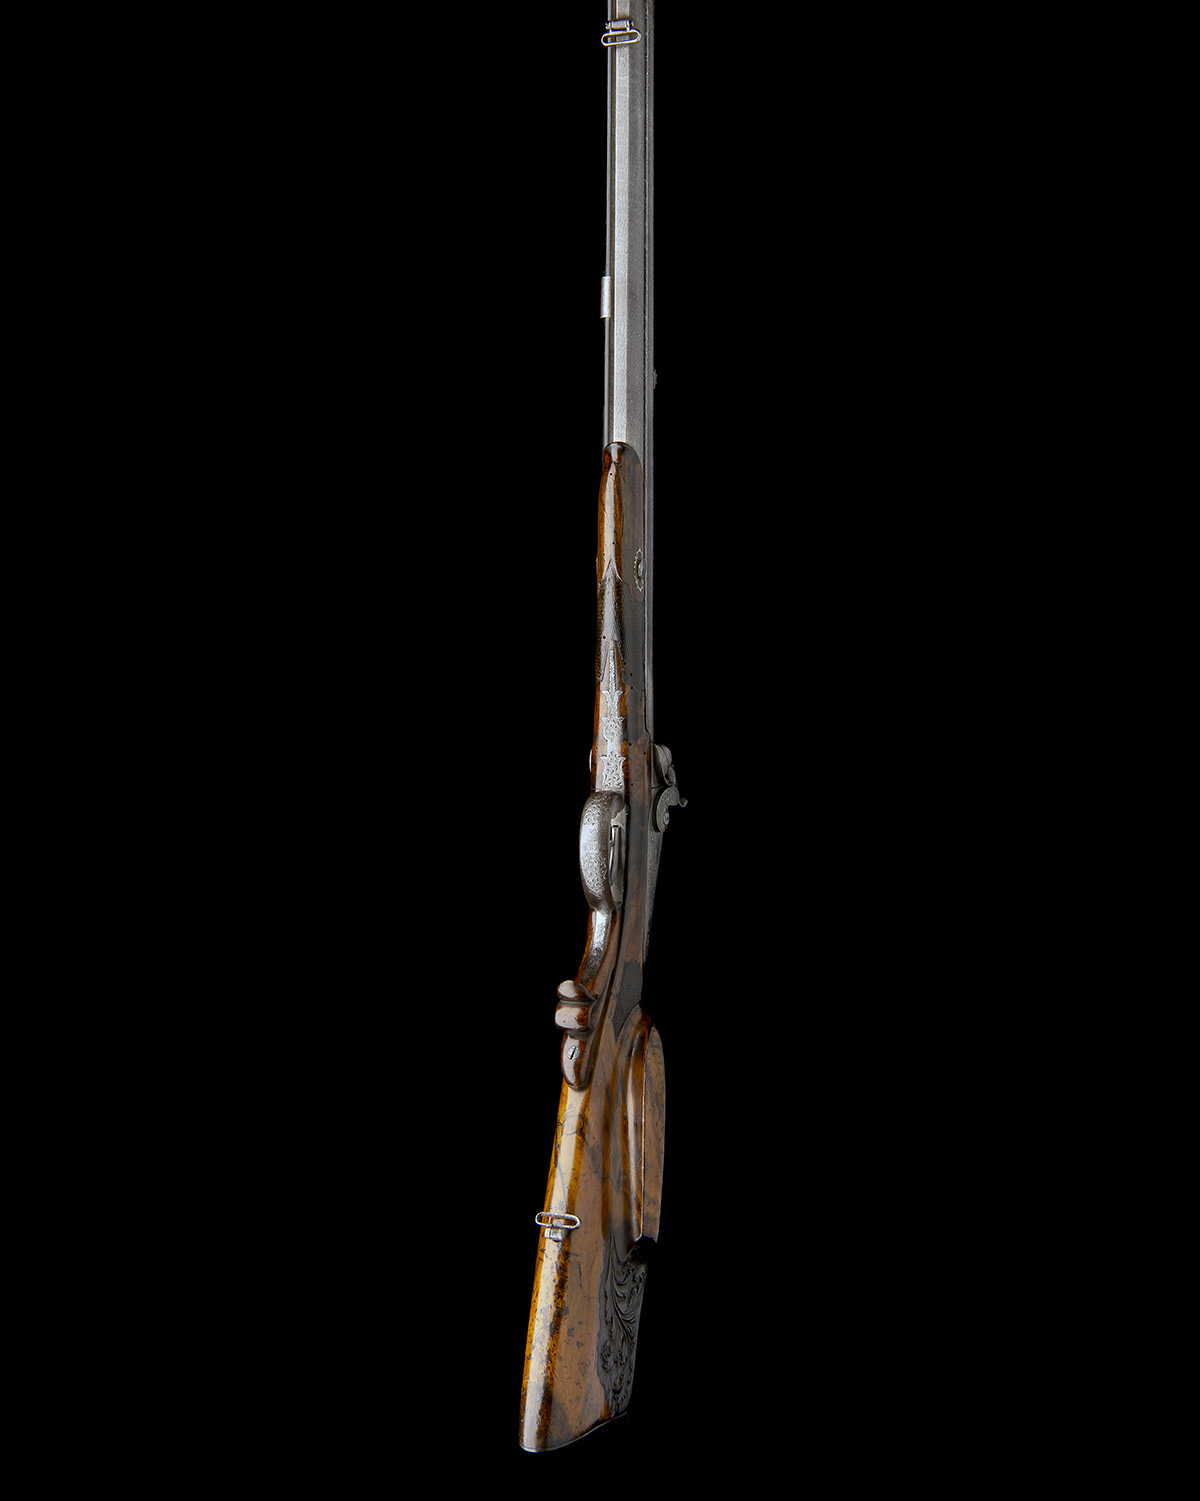 BAADER, MUNICH A FINE 40-BORE PERCUSSION OVER-UNDER DOUBLE-RIFLE, no visible serial number, circa - Image 8 of 14